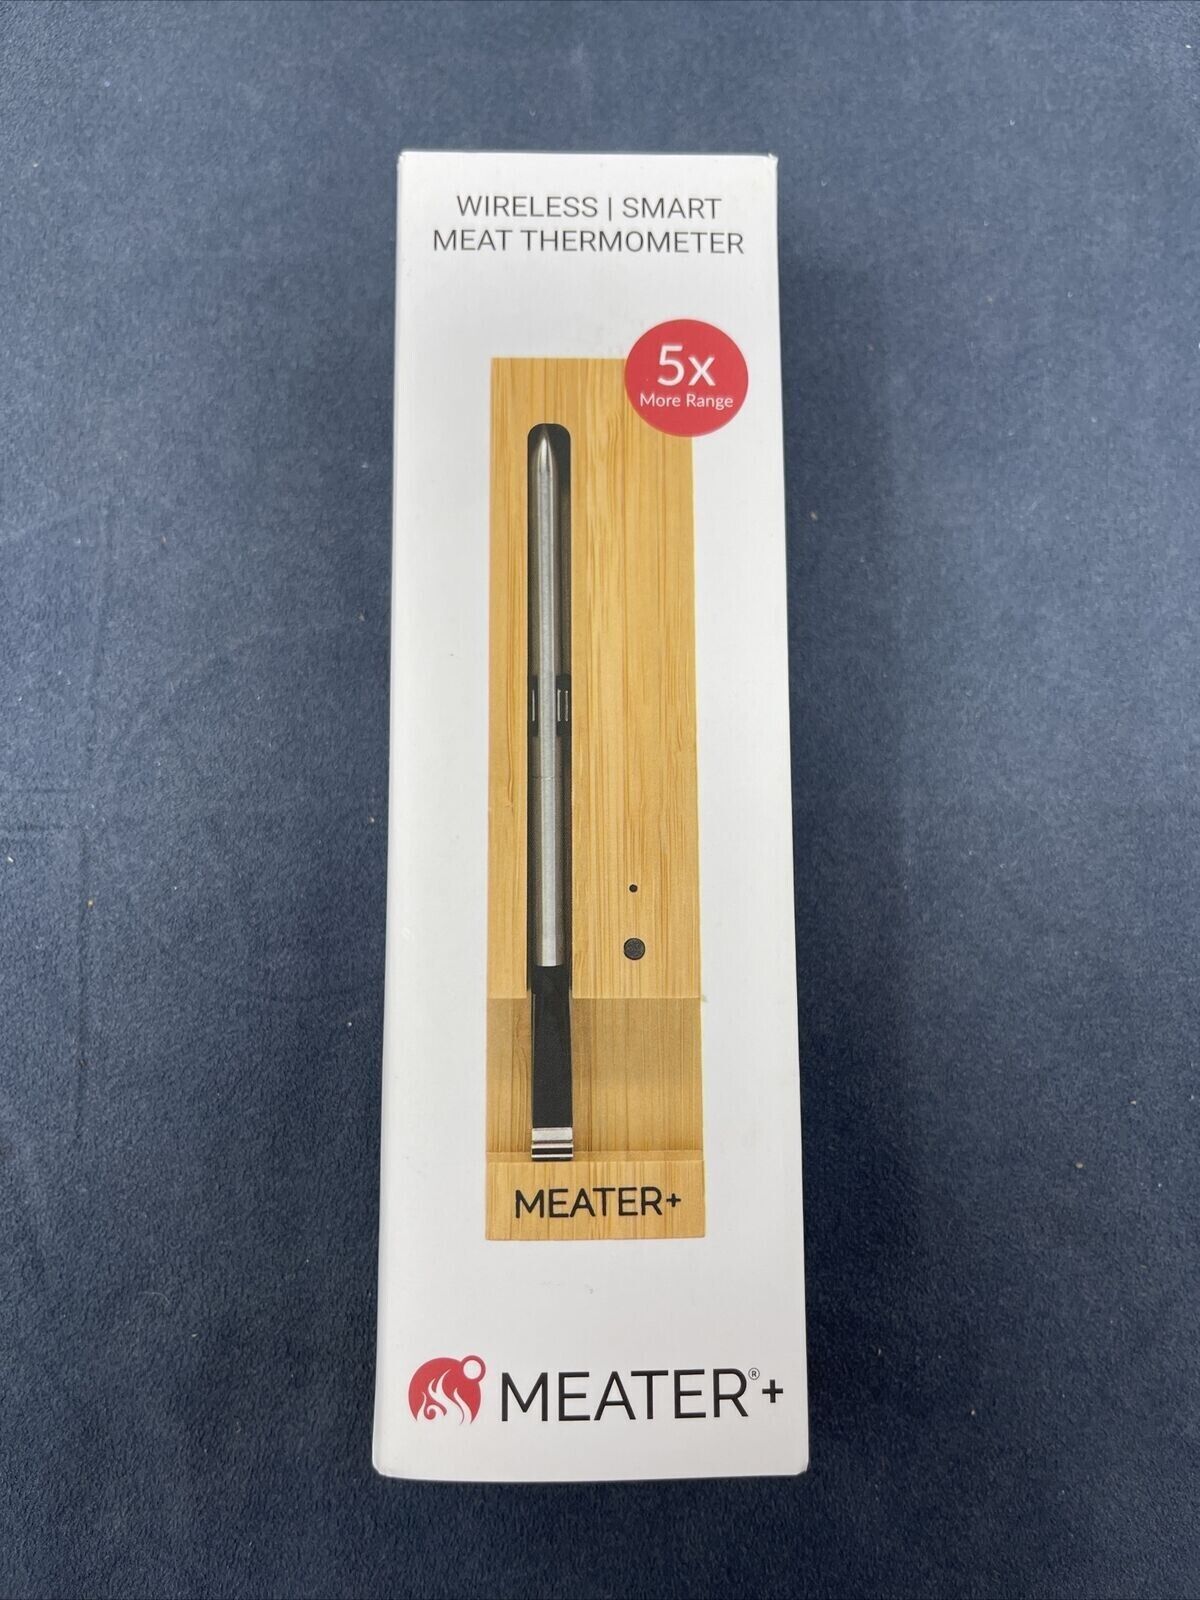 MEATER plus + Smart Meat Thermometer with Bluetooth 165Ft Range RT1-MT-MP01 NEW